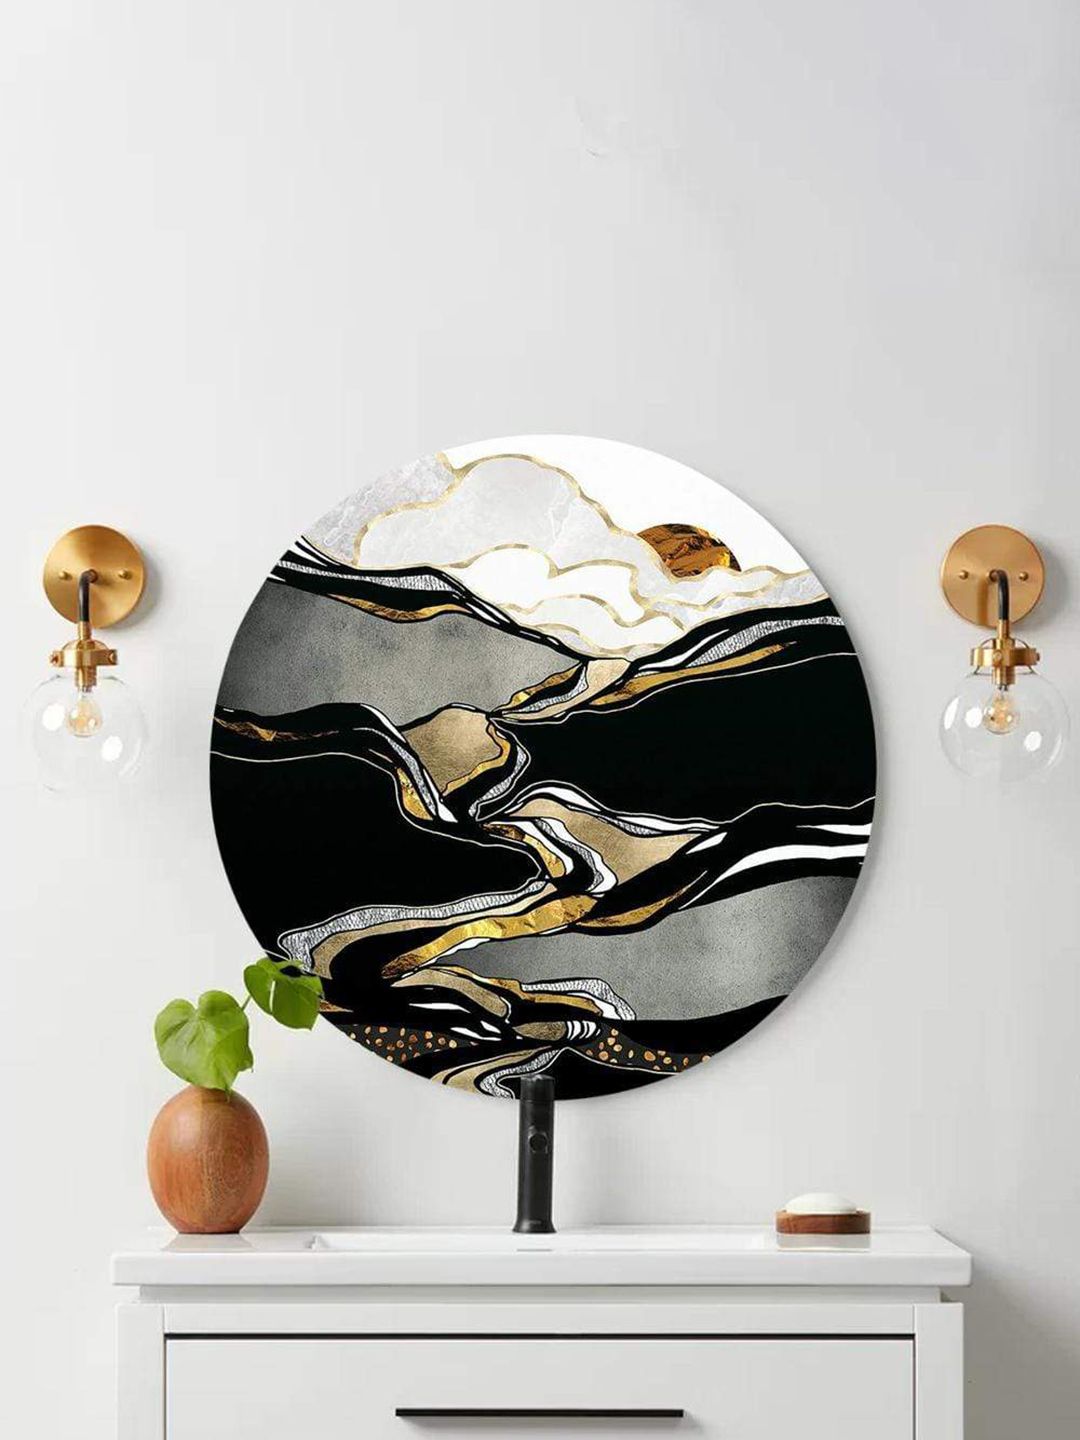 THE ARTMENT Black & White Gold Scape Wall Art Price in India